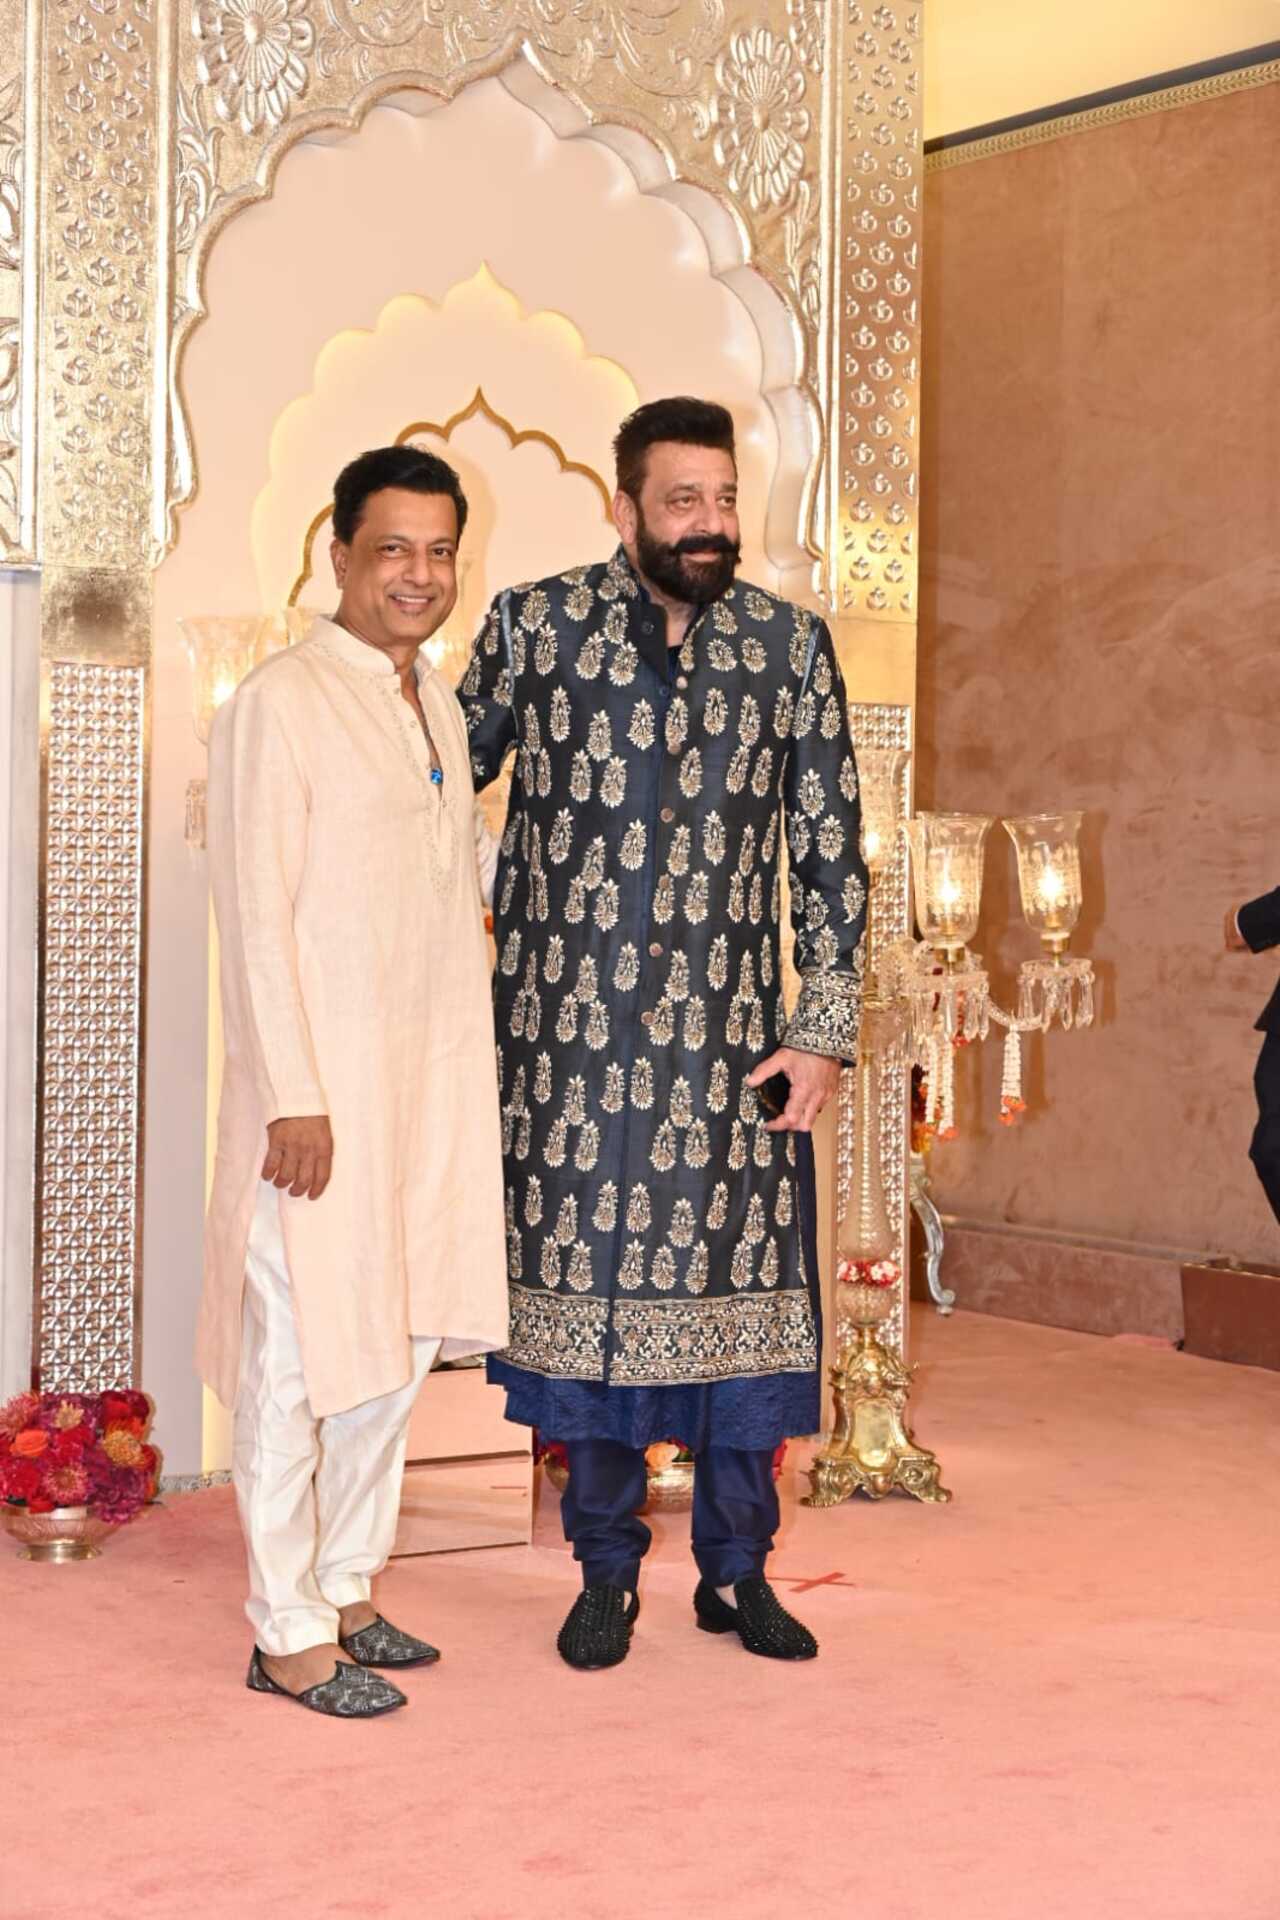 Sanjay Dutt poses with his friend